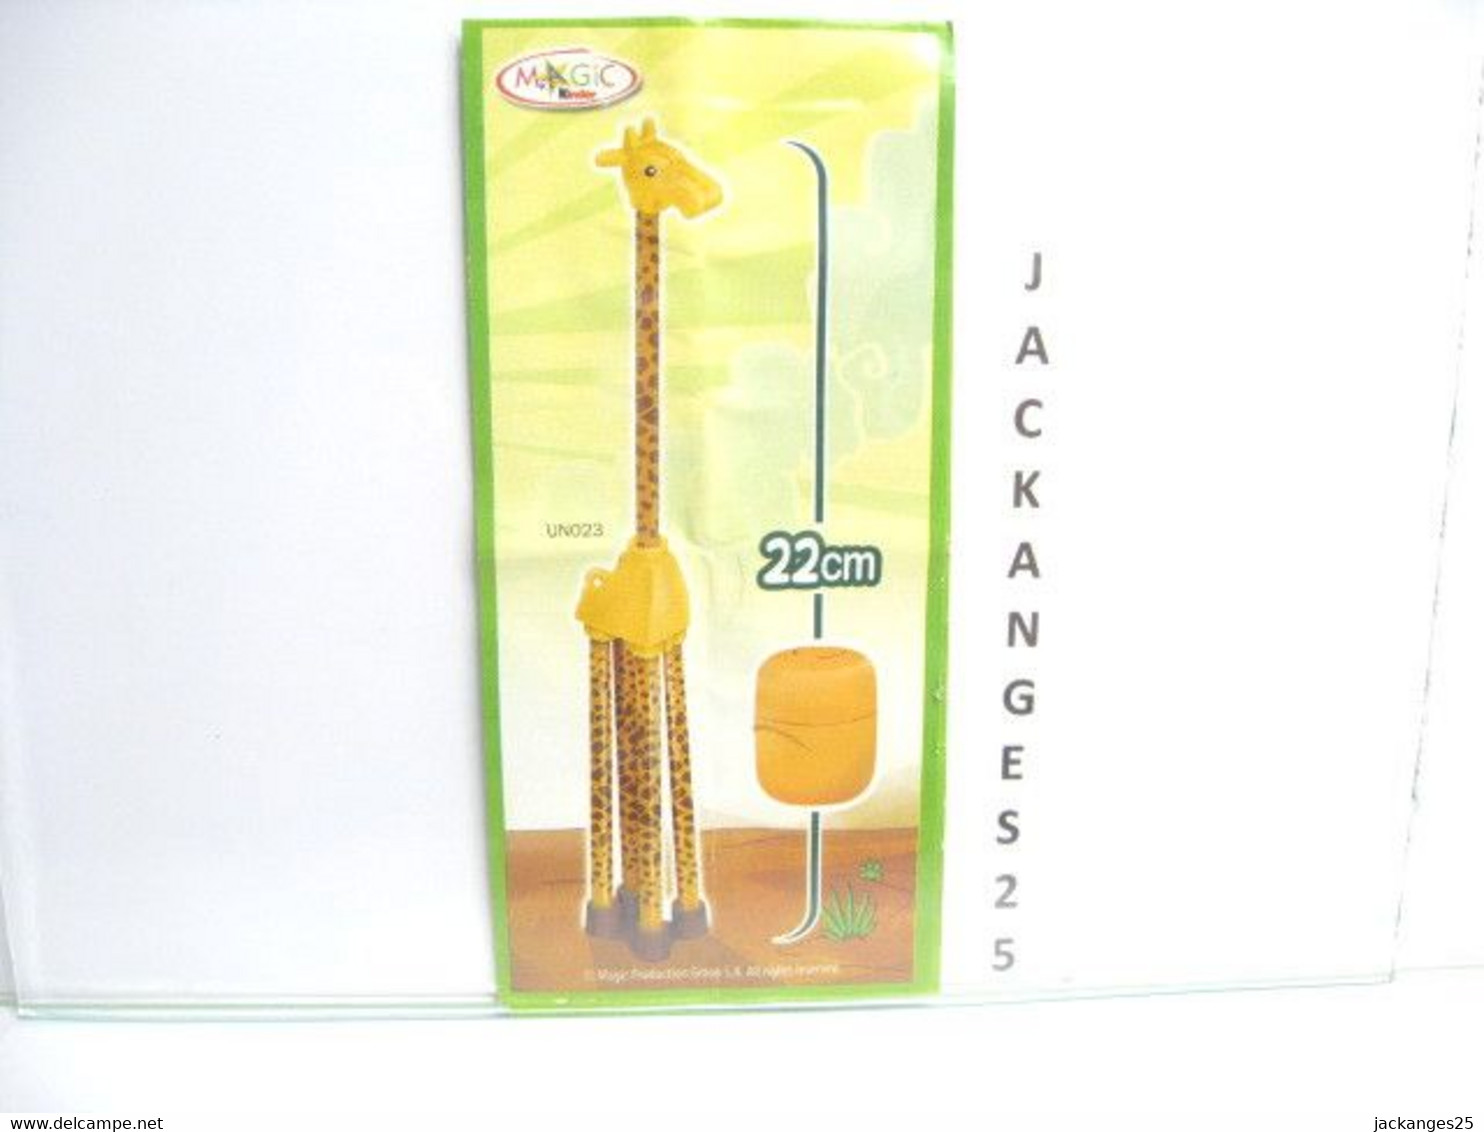 KINDER MPG UN 23 A GIRAFE  ANIMAUX NATURE NATOONS TIERE 2010  2011 + BPZ A - Familias